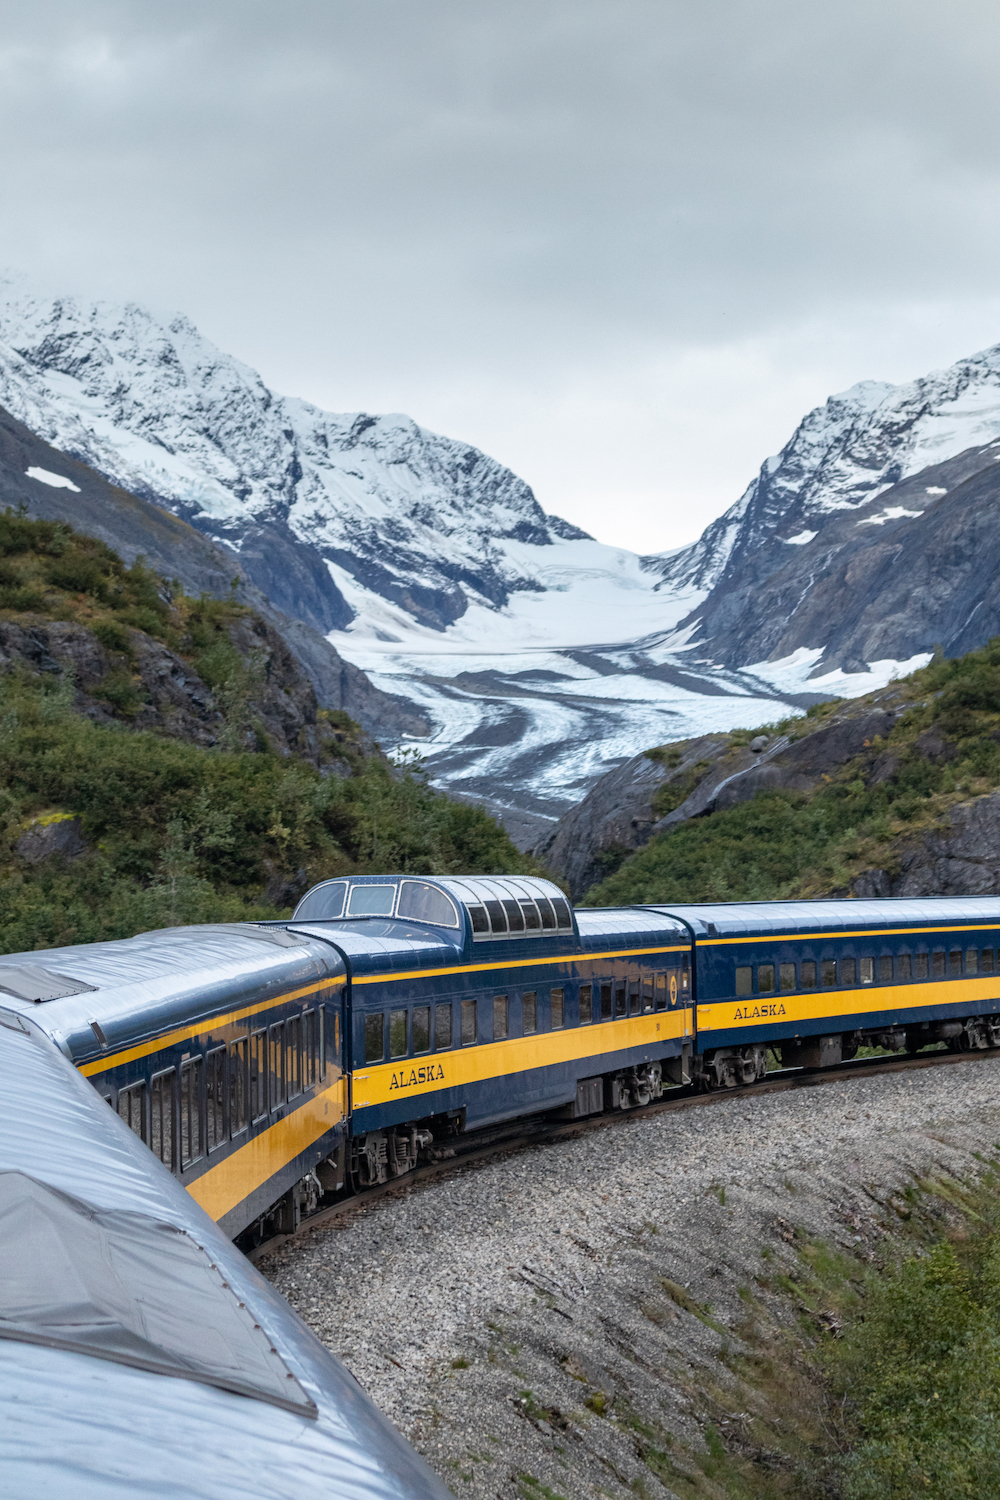 Passenger train cars curve past a backdrop of snow-covered mountains.